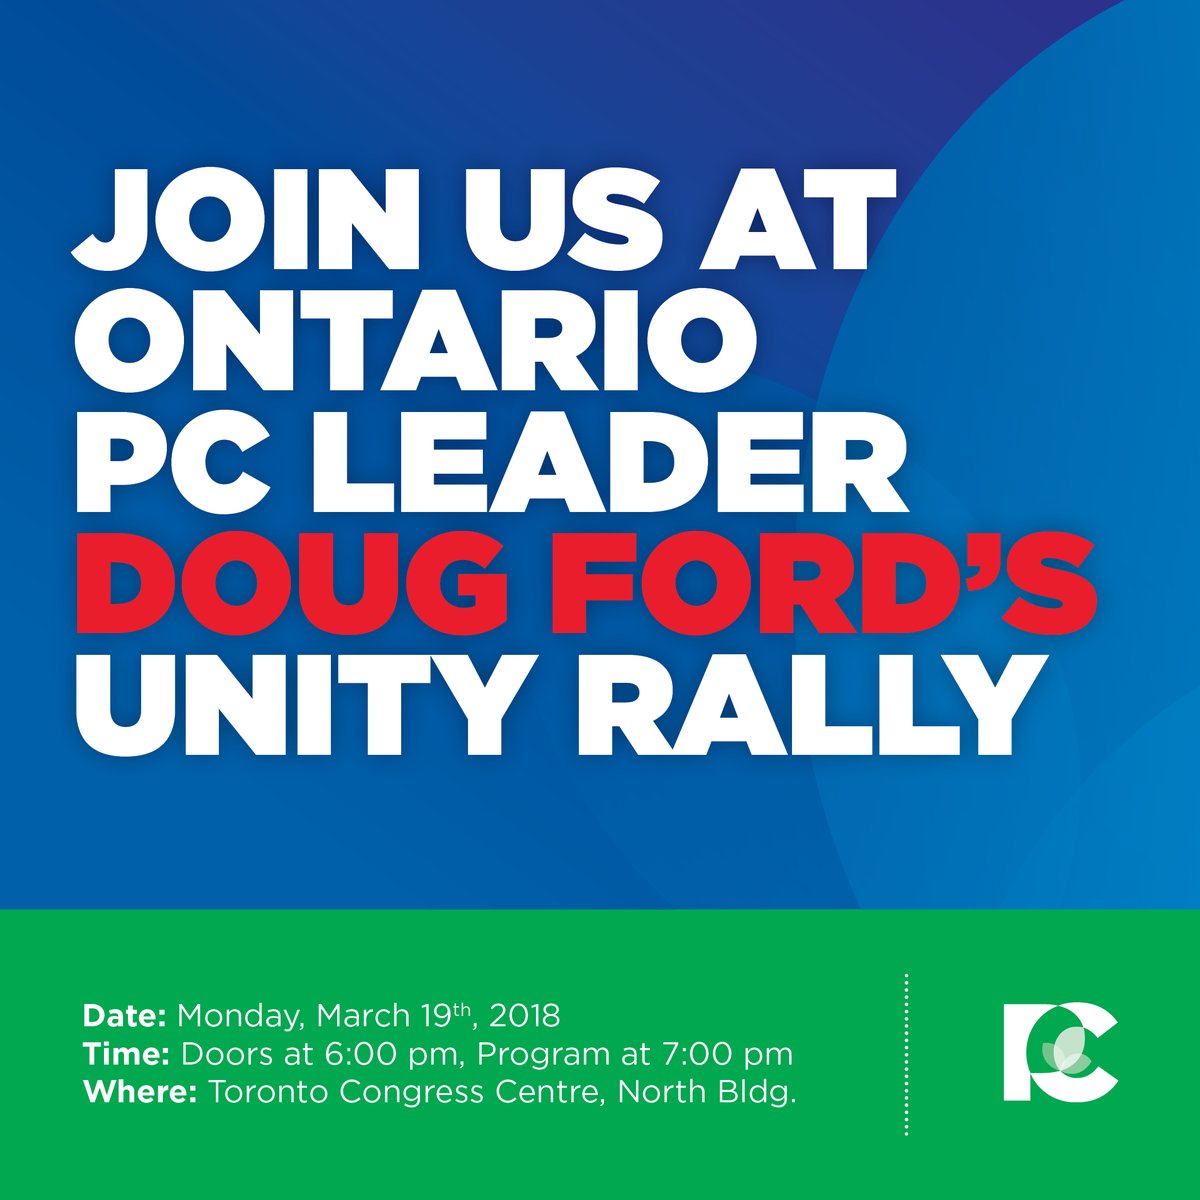 It is so important for us to come & show our support for Doug Ford and make the #UnityRally the biggest rally in Ontario's modern history.
There's nowhere else that I'd rather be than in this great crowd.
Let's force the media to show just how #FordStrong #FordNation is!
#onpoli